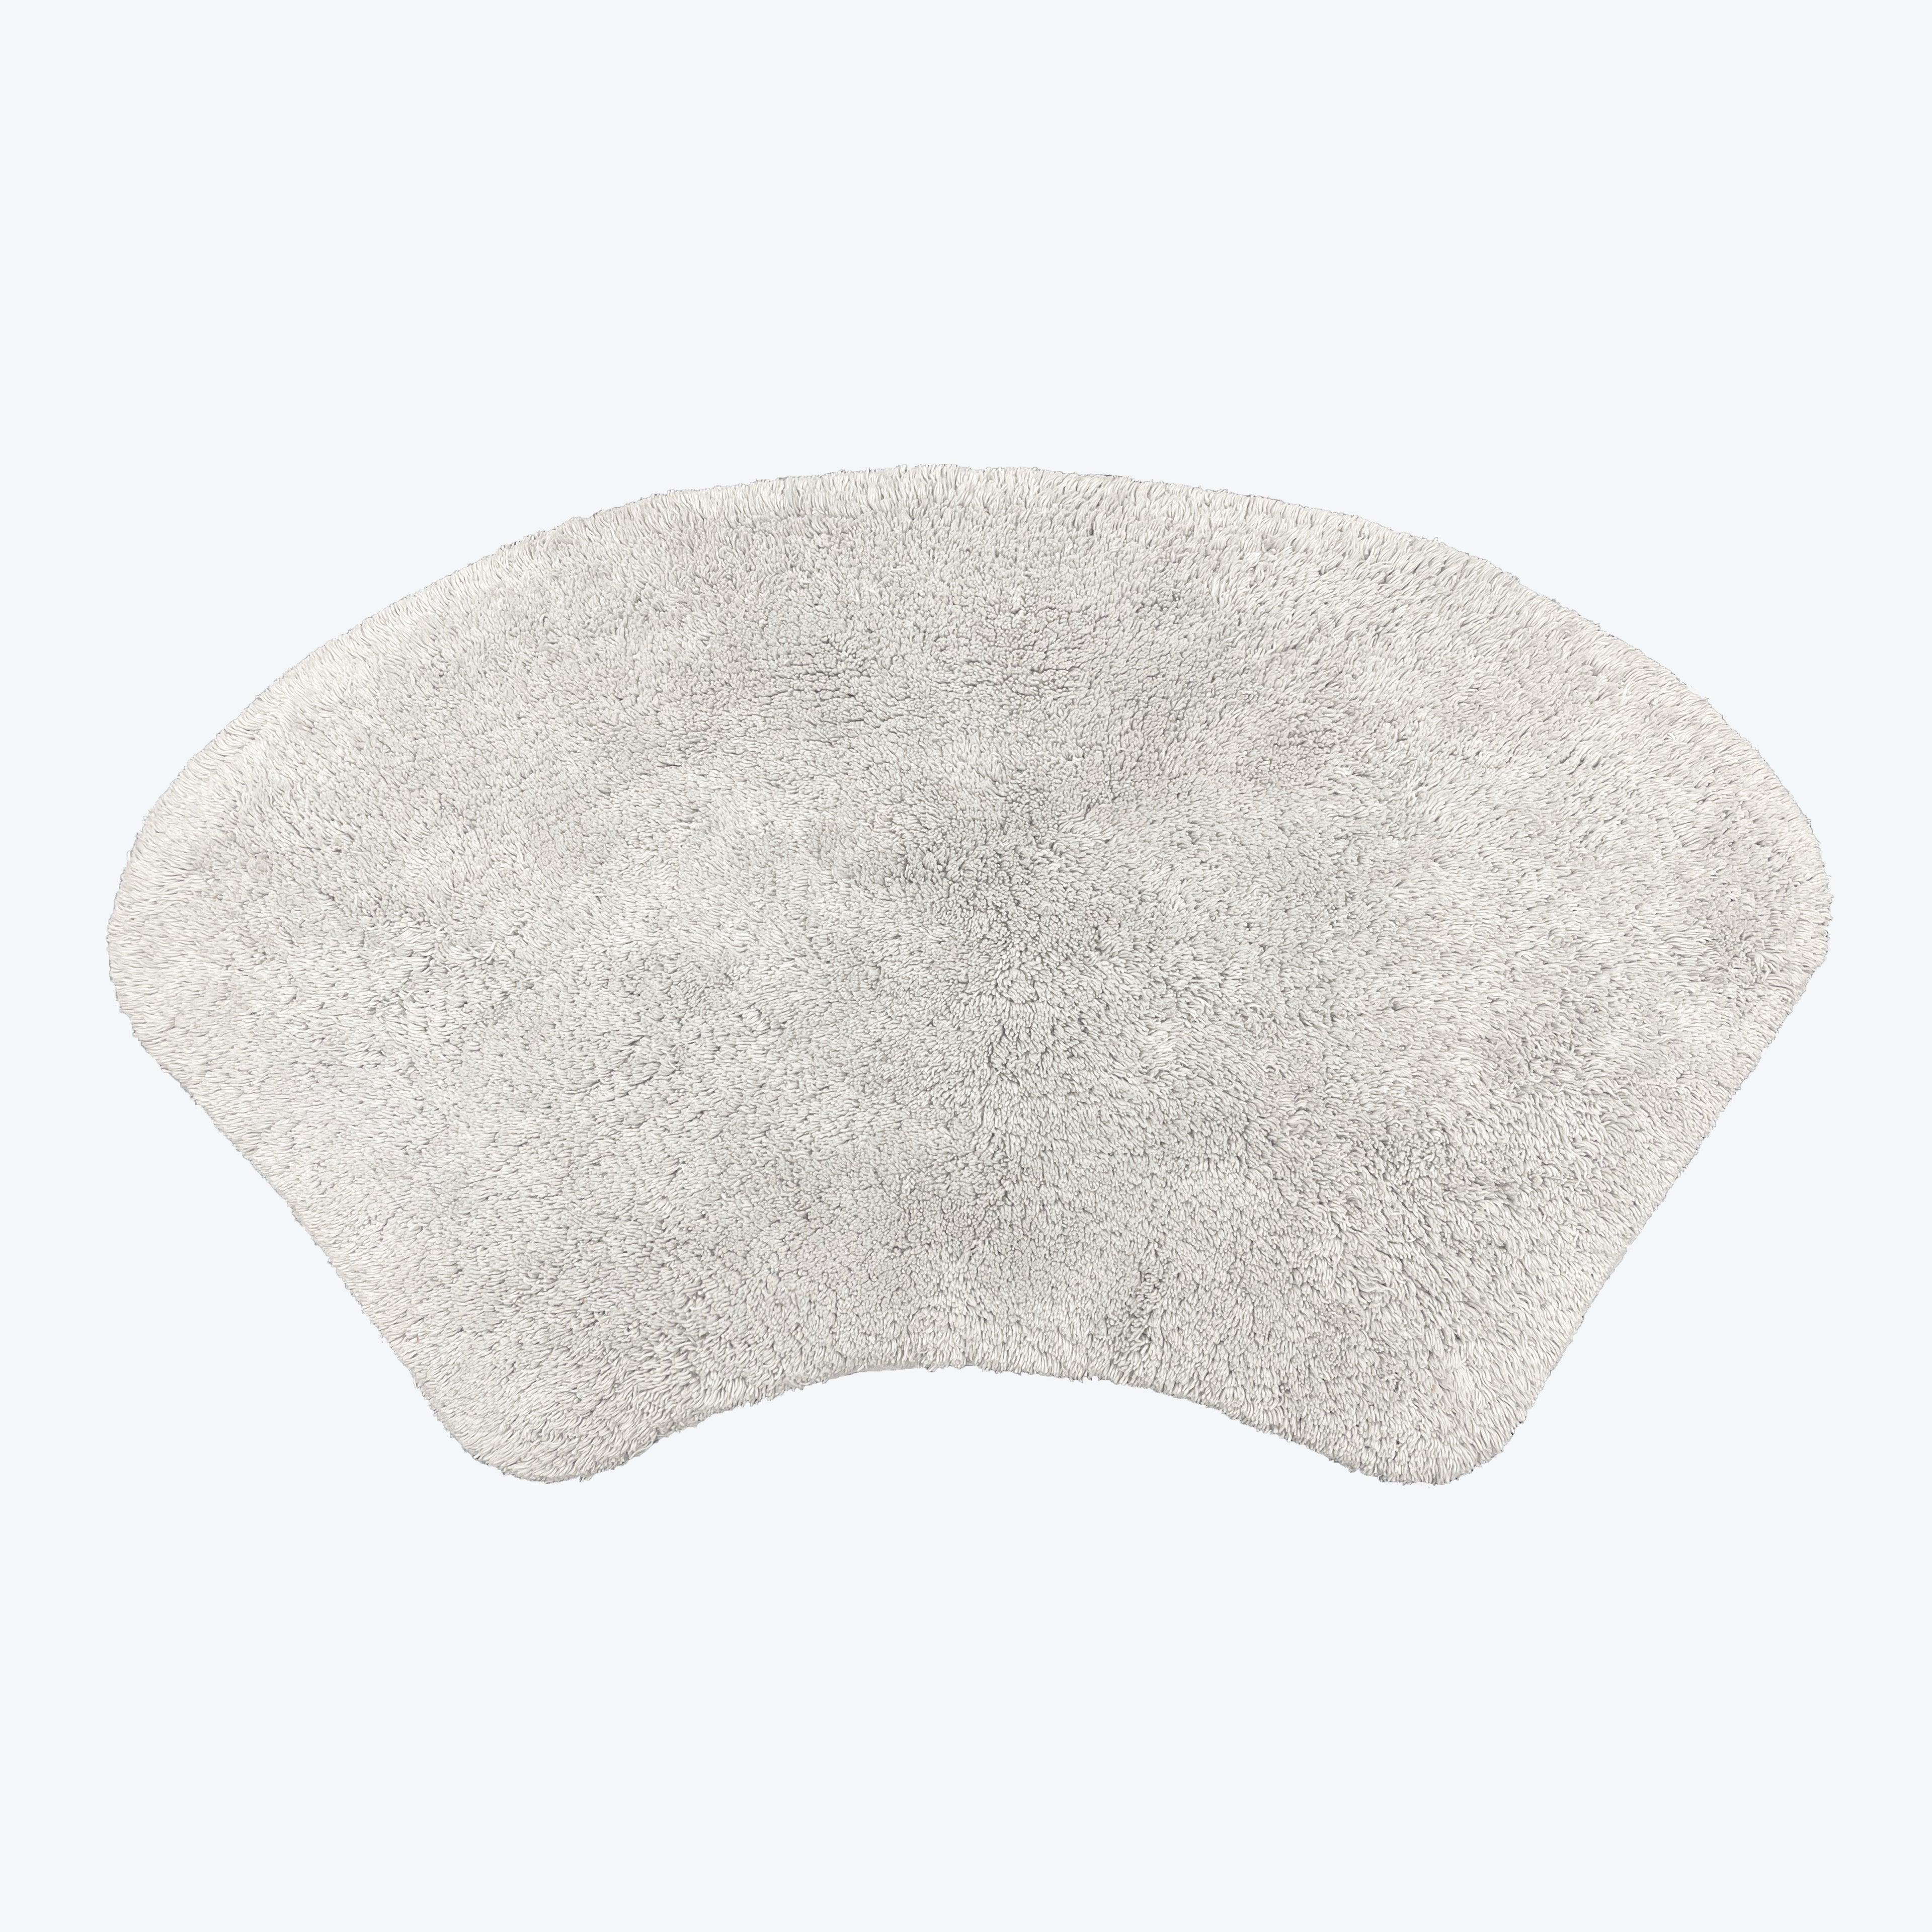 Dove grey curved shower mat 100% cotton.